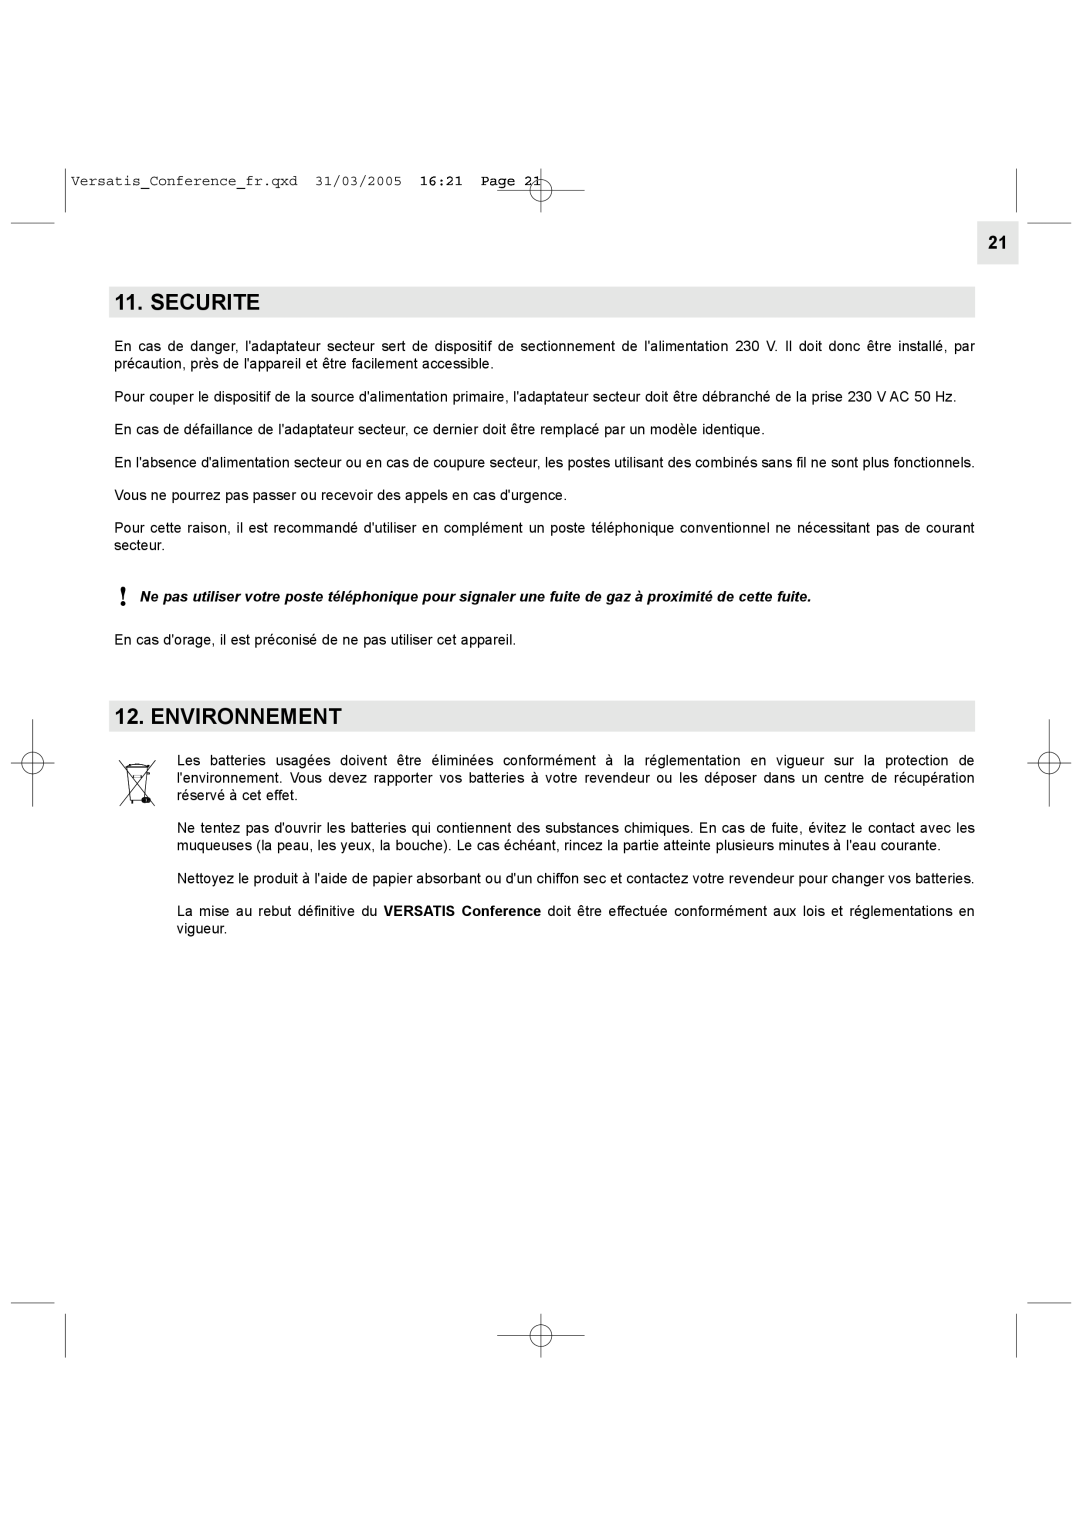 Alcatel Carrier Internetworking Solutions Conference Phone manual Securite, Environnement 